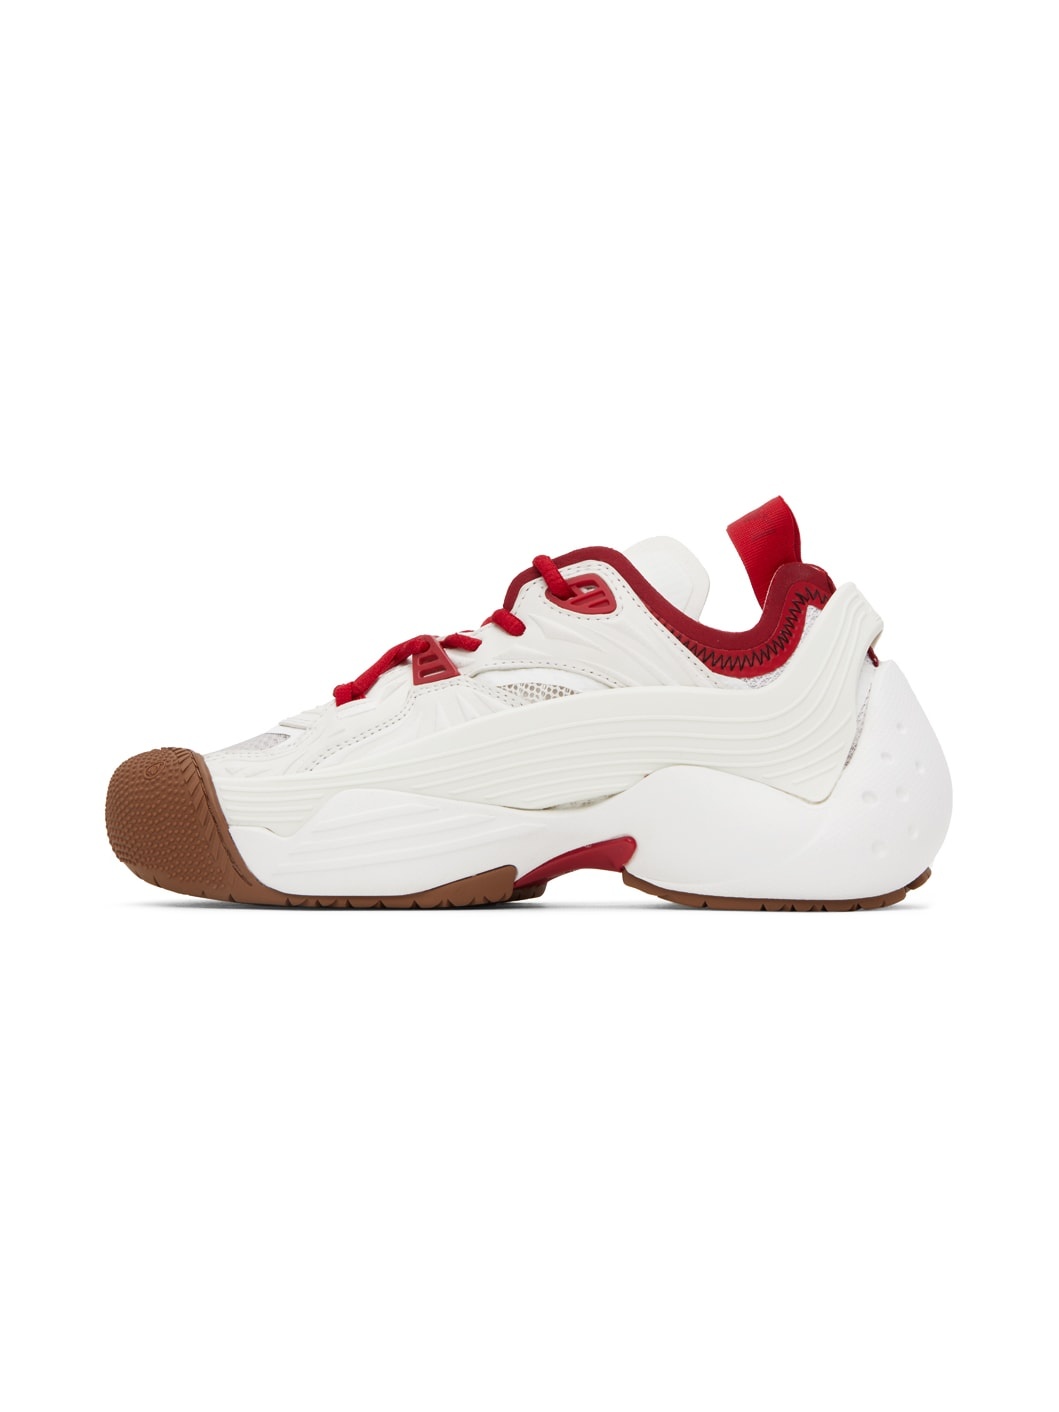 SSENSE Exclusive Red & White Flash-X Sneakers - 3